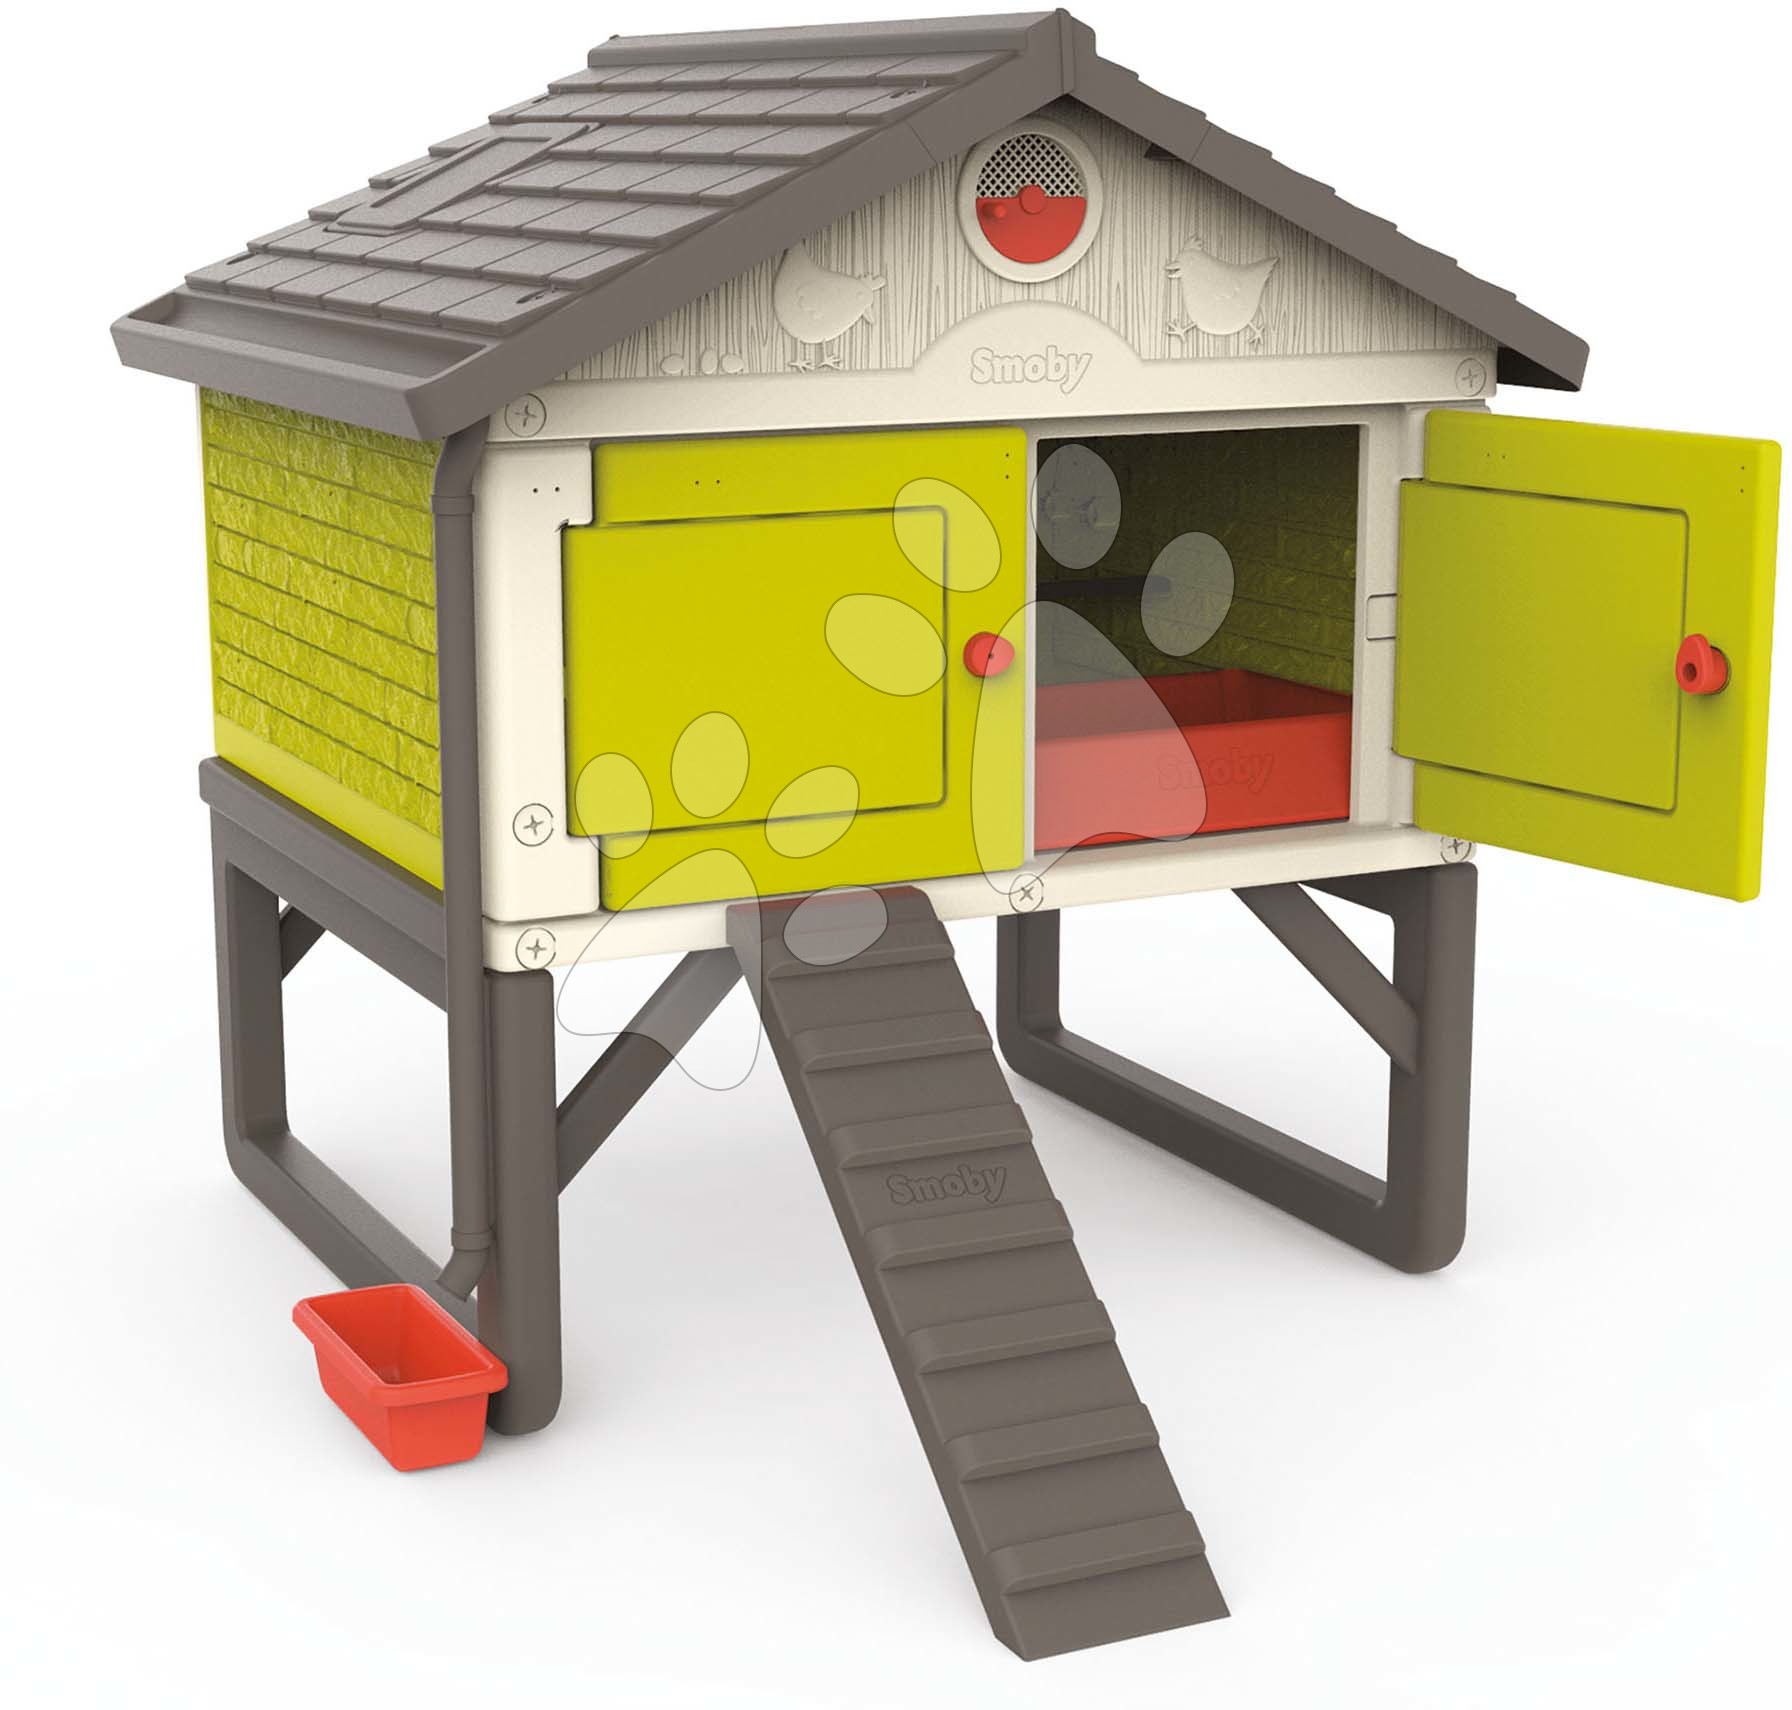 Pollaio per 5 galline Cluck Cluck Cottage Green Smoby